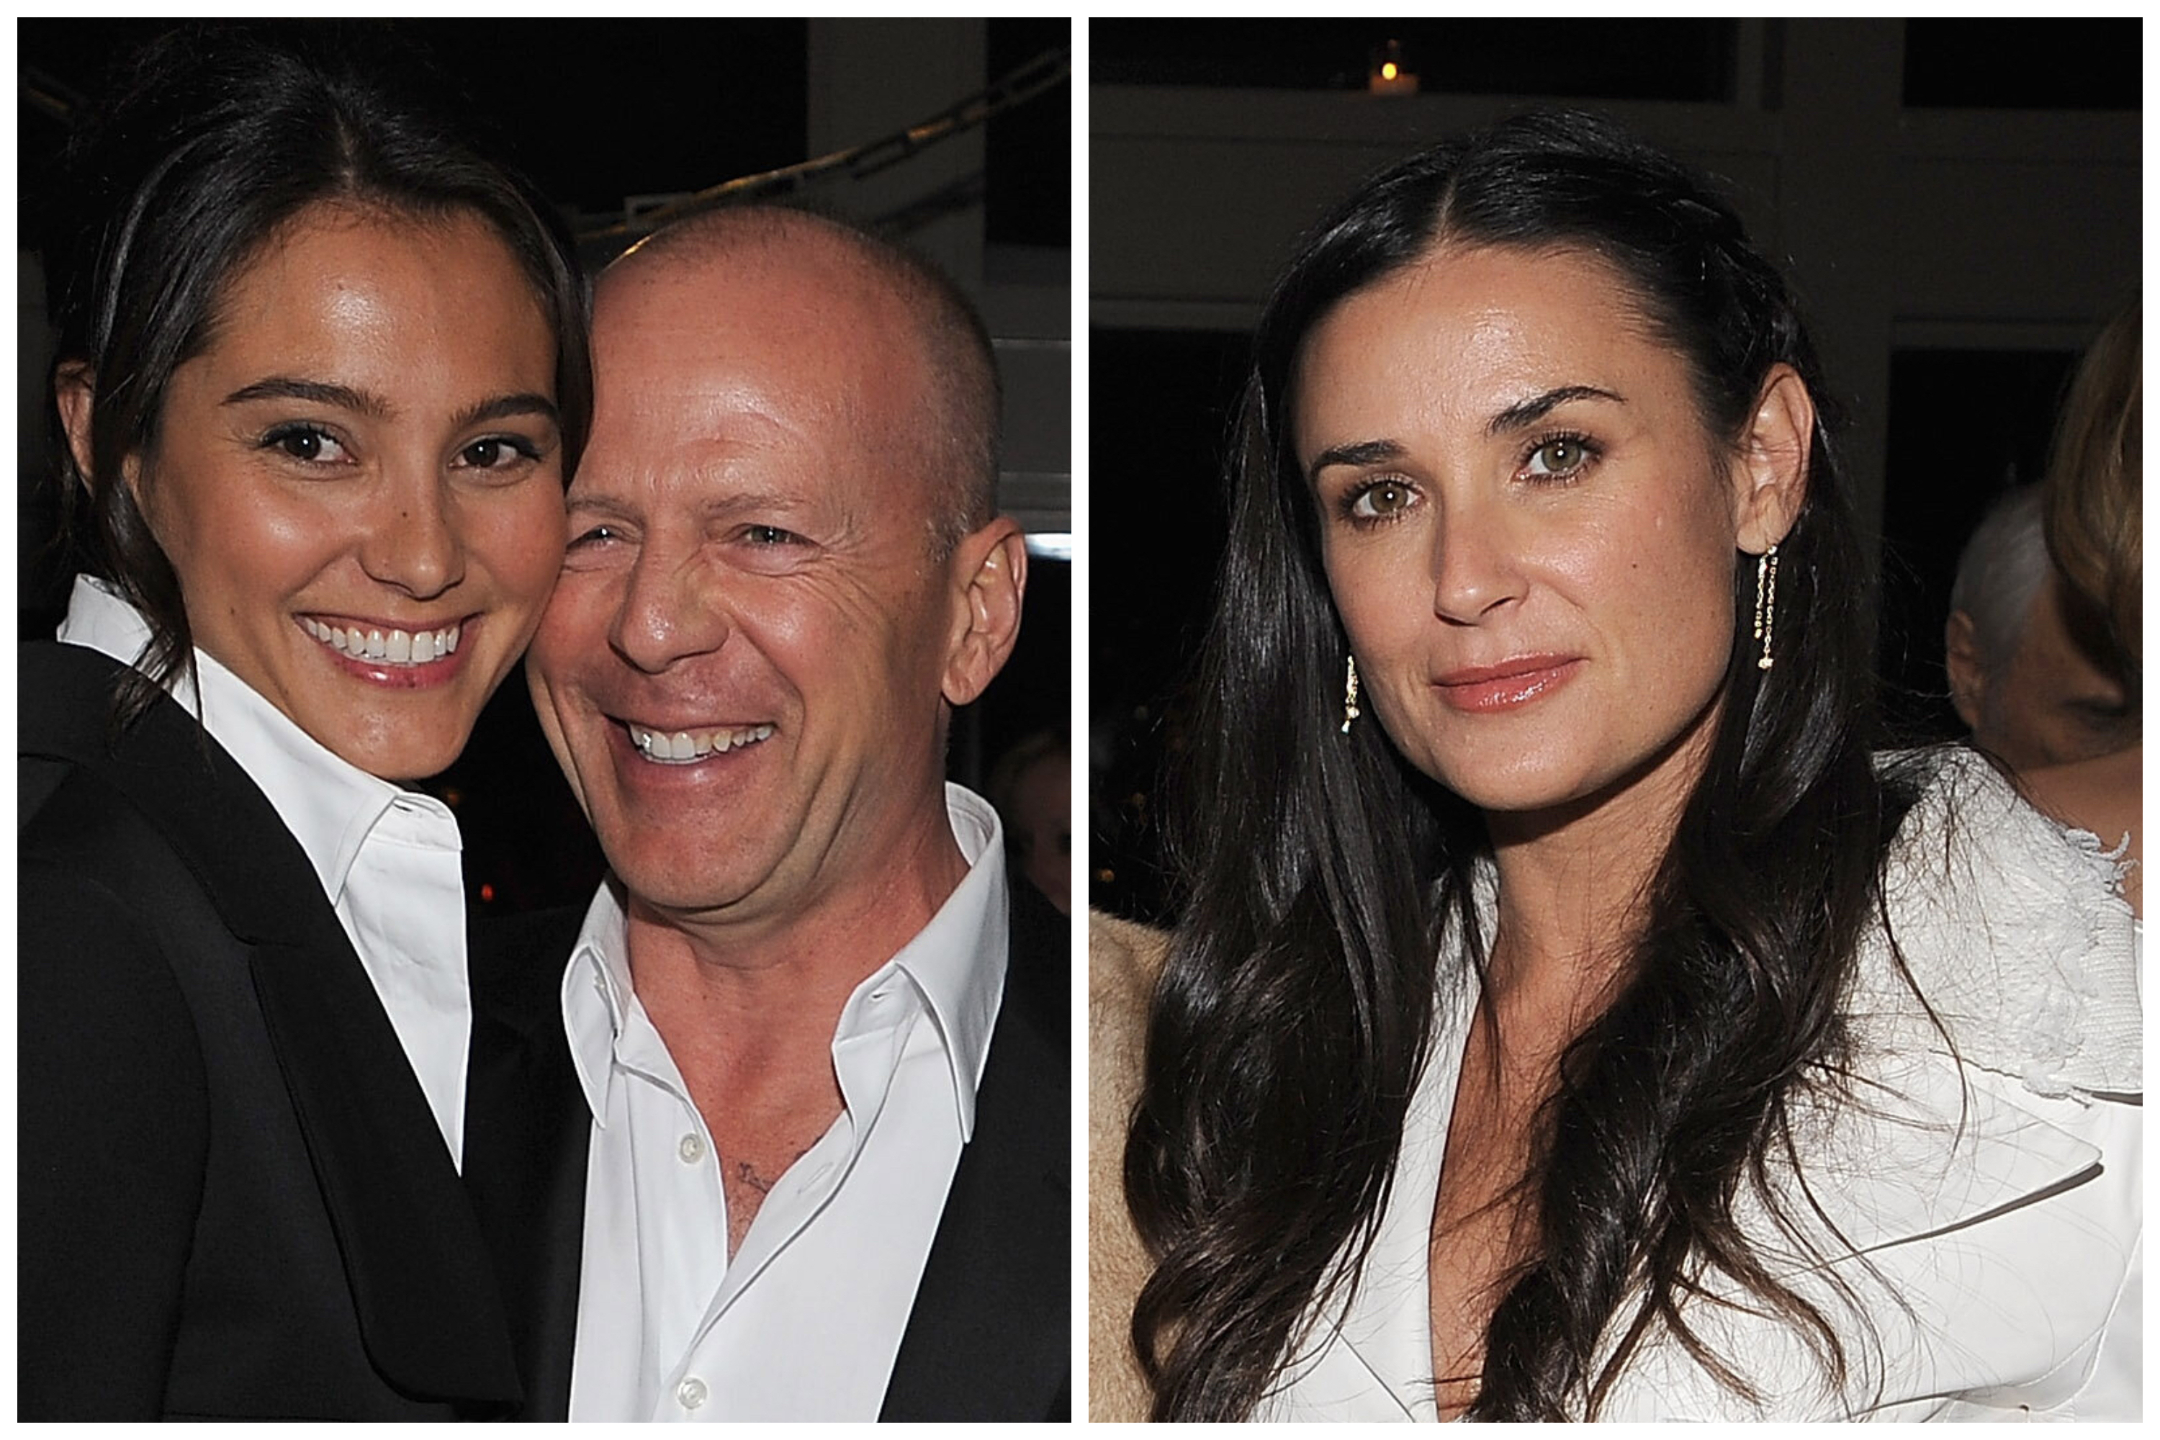 Bruce Willis' wife opens up about his marriage to Demi Moore - JanPost